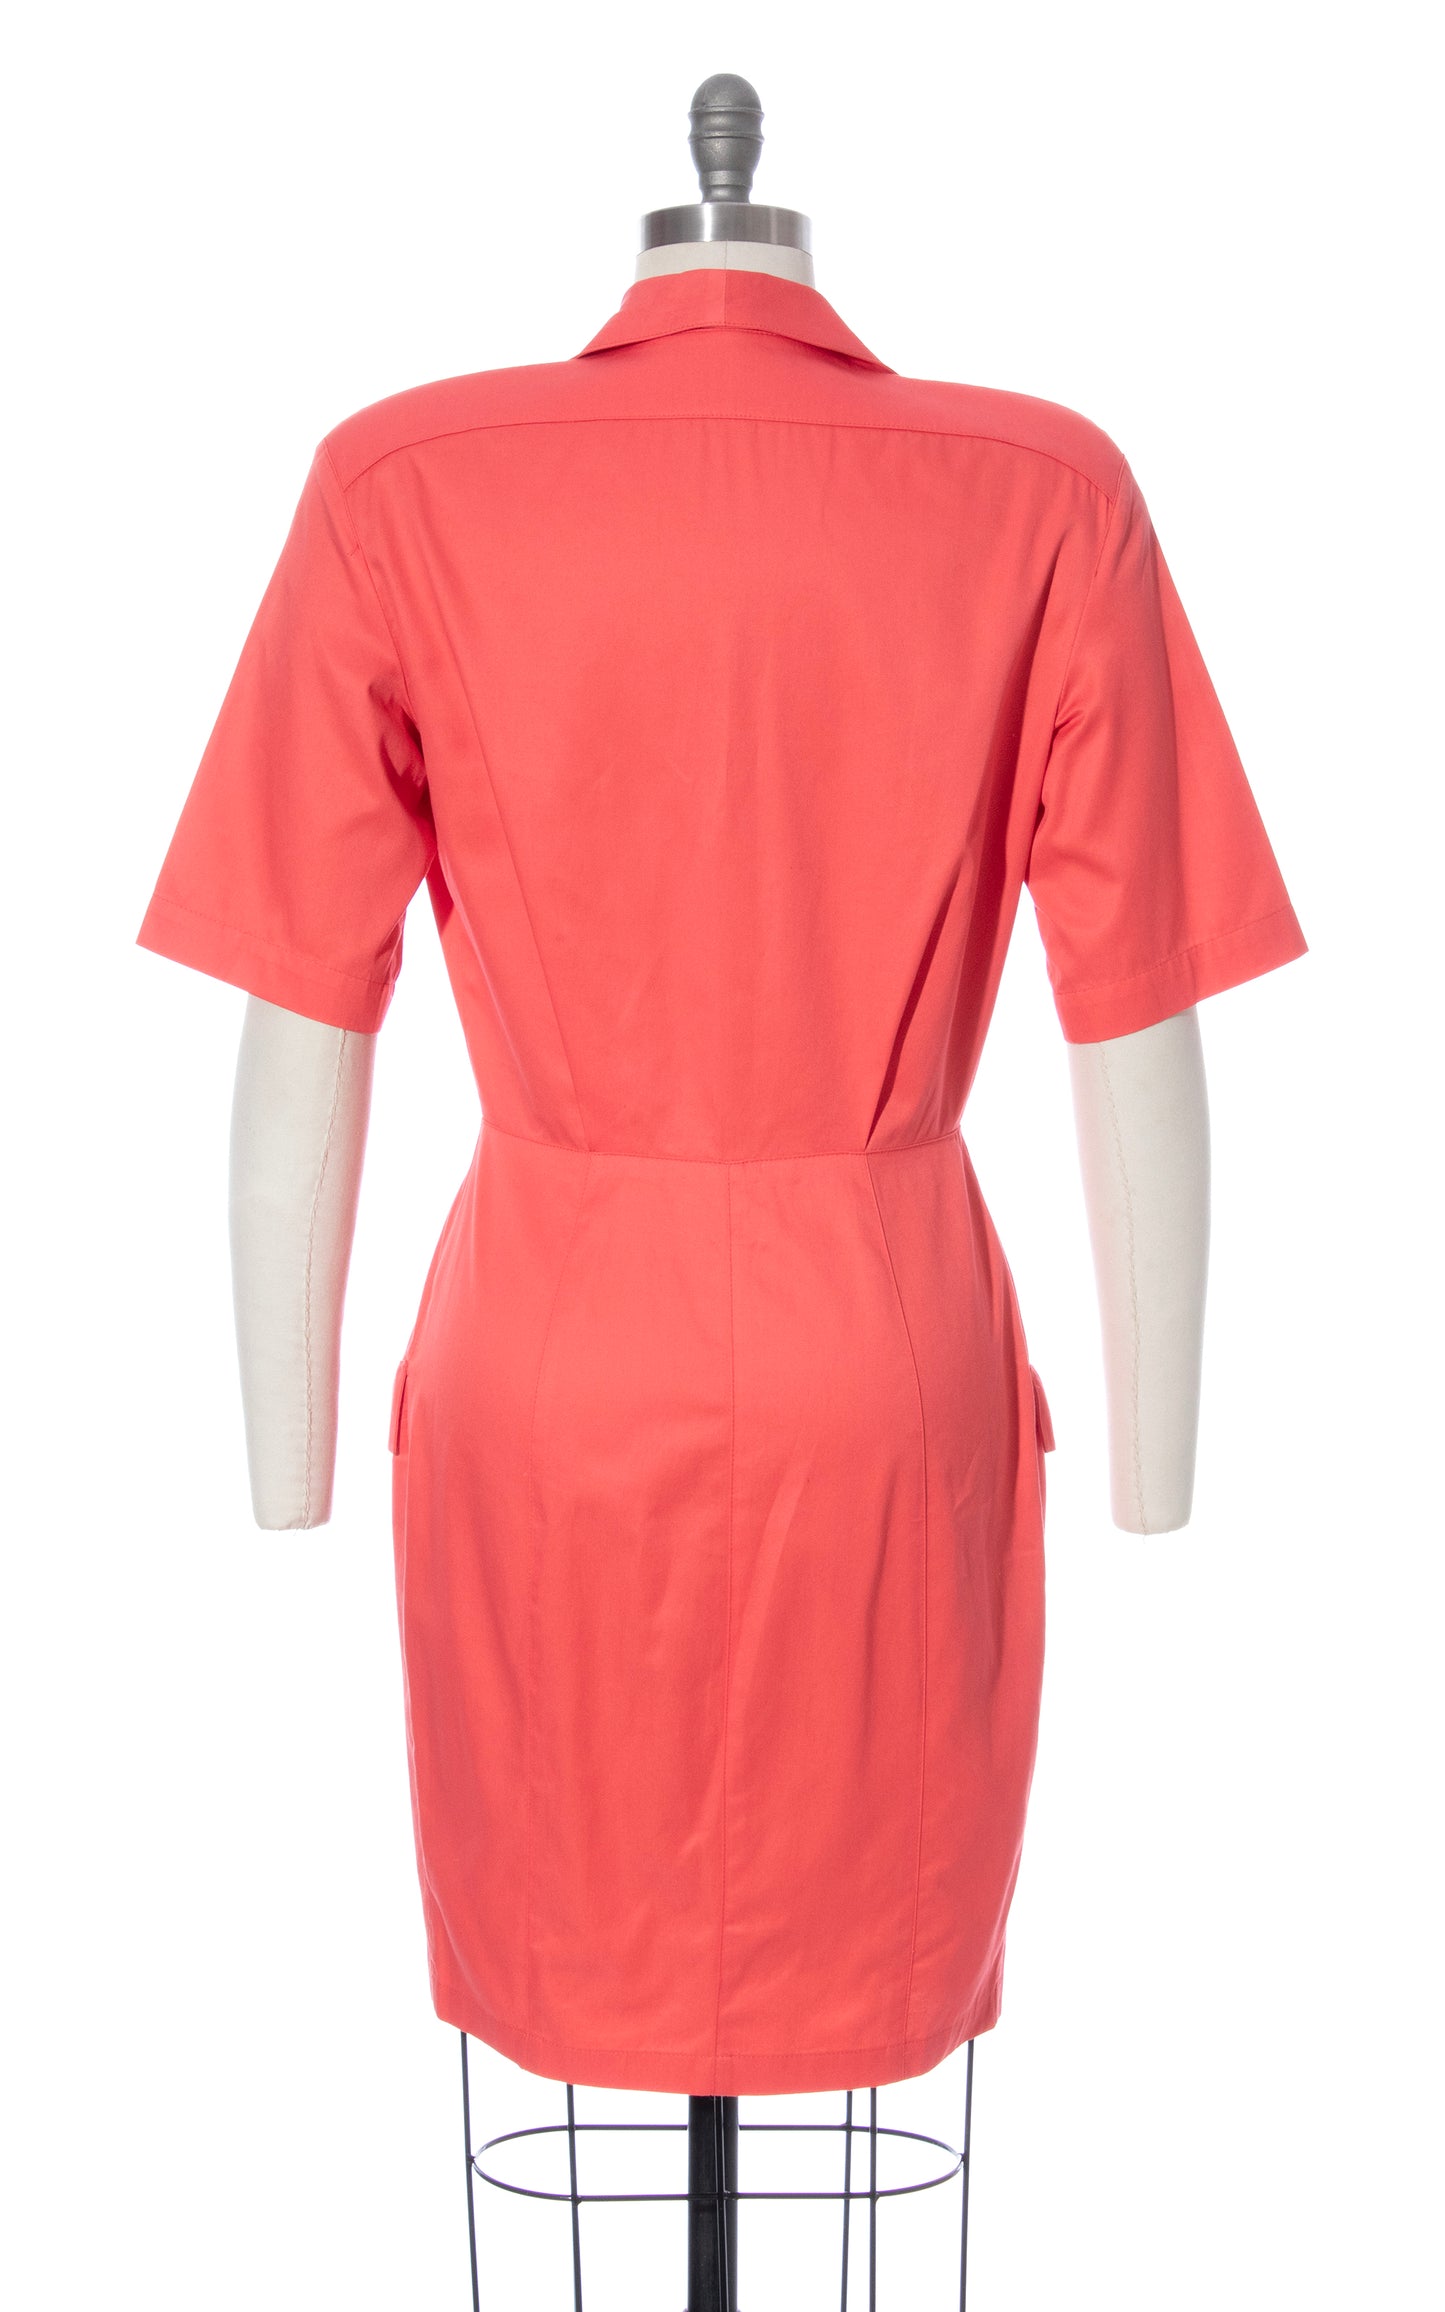 Vintage 80s 1980s THIERRY MUGLER Salmon Pink Cotton Wiggle Dress with Pockets BirthdayLifeVintage